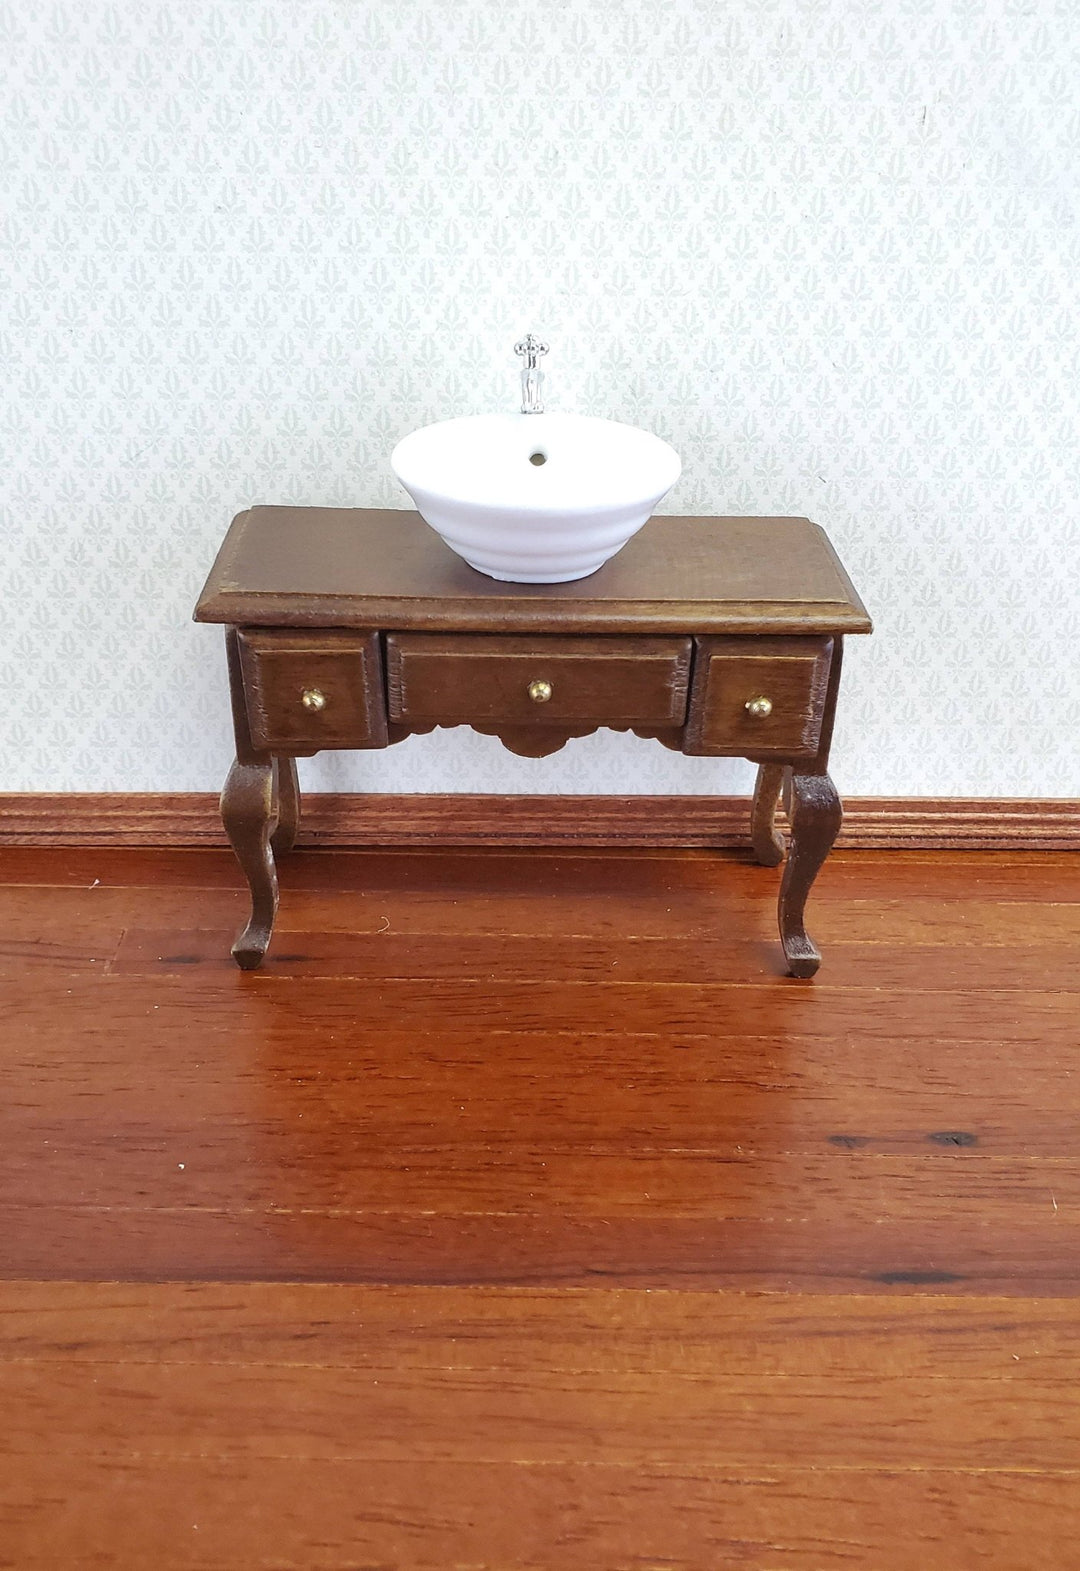 Dollhouse Miniature Vanity Table with Drawers Wood Walnut Finish 1:12 Scale Furniture - Miniature Crush